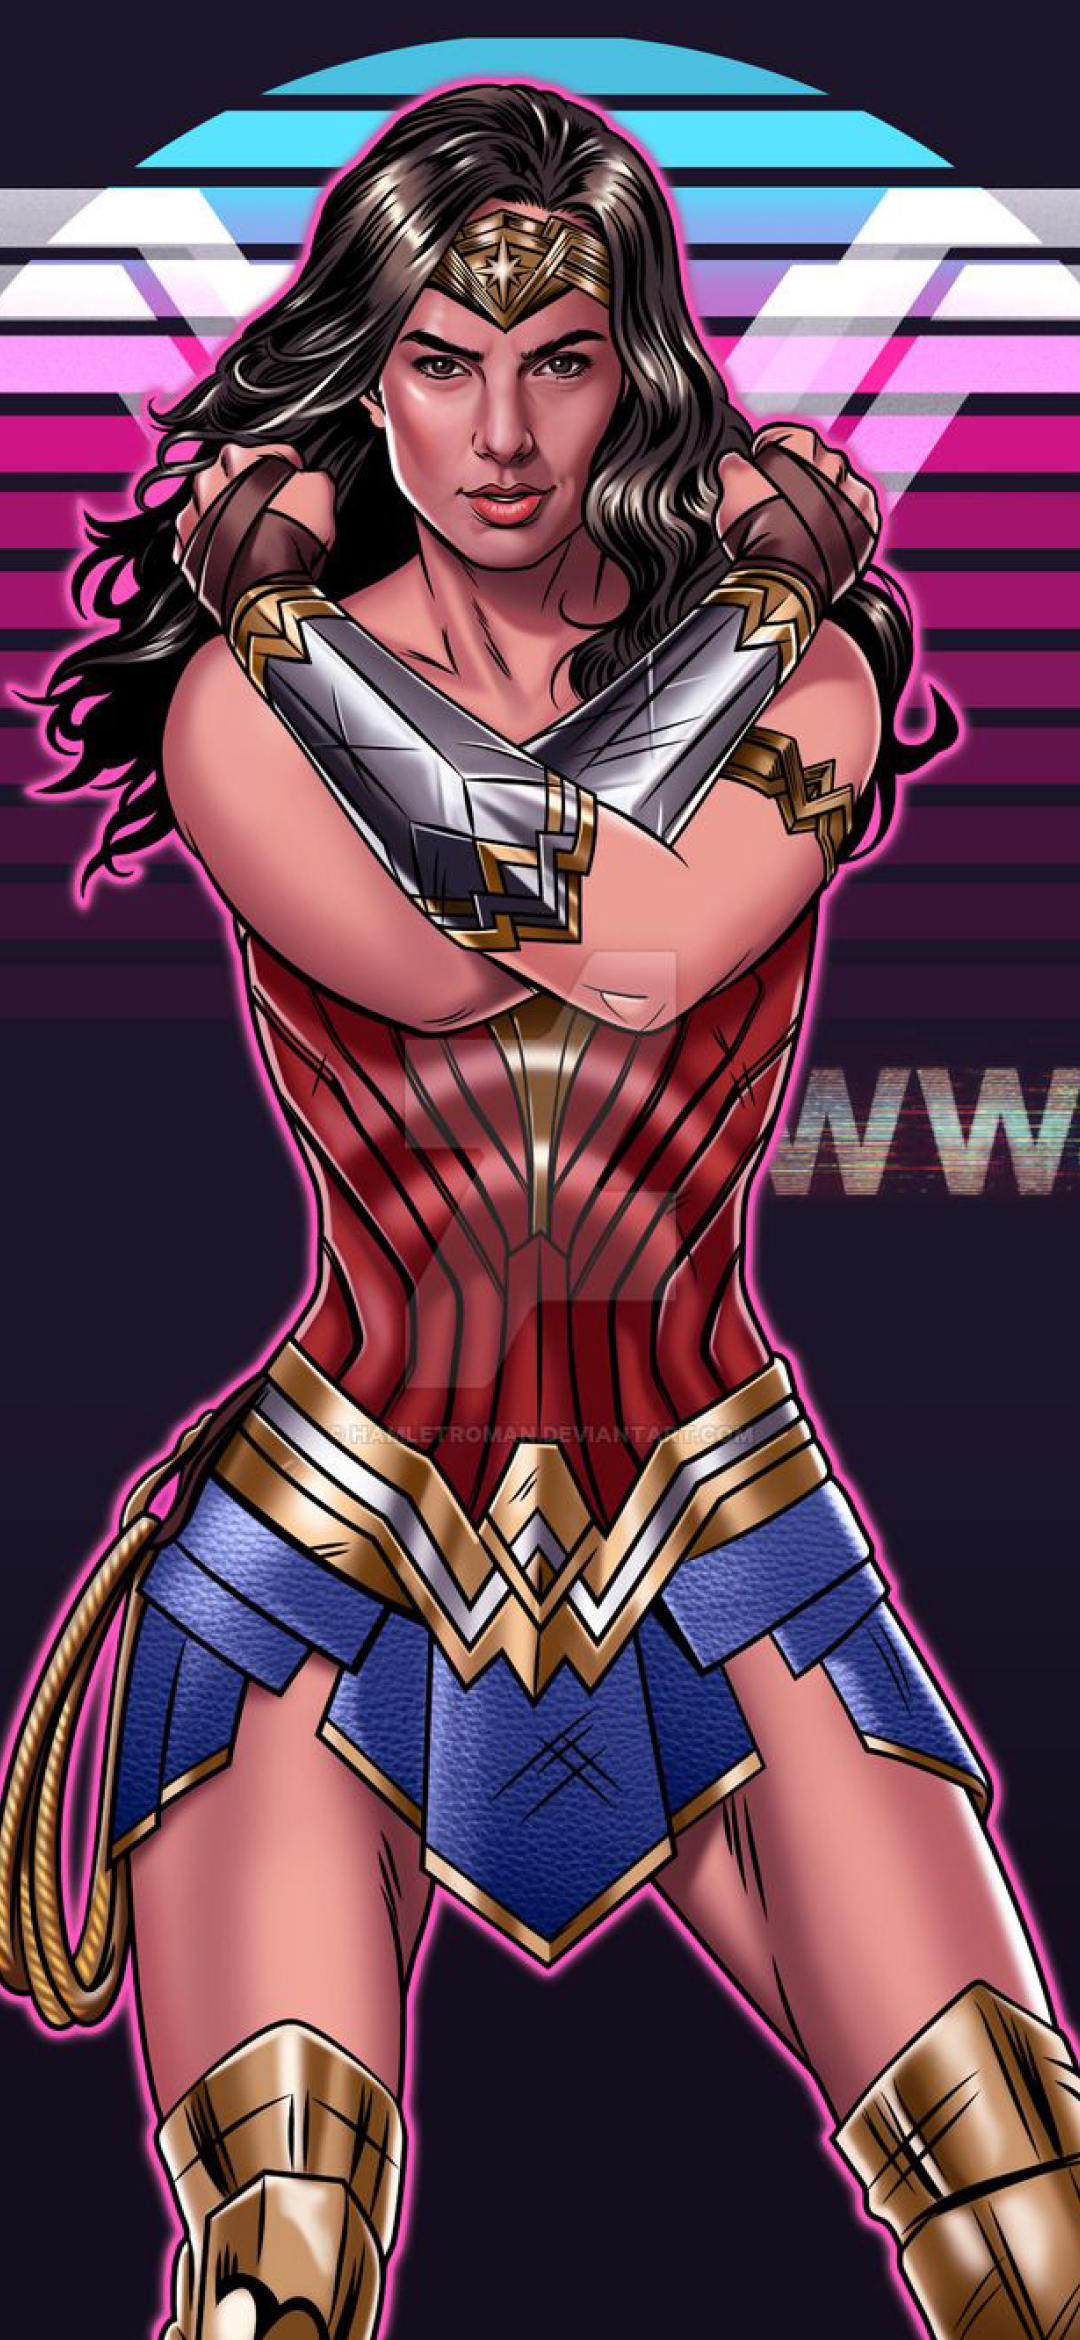 Wonder Woman for apple download